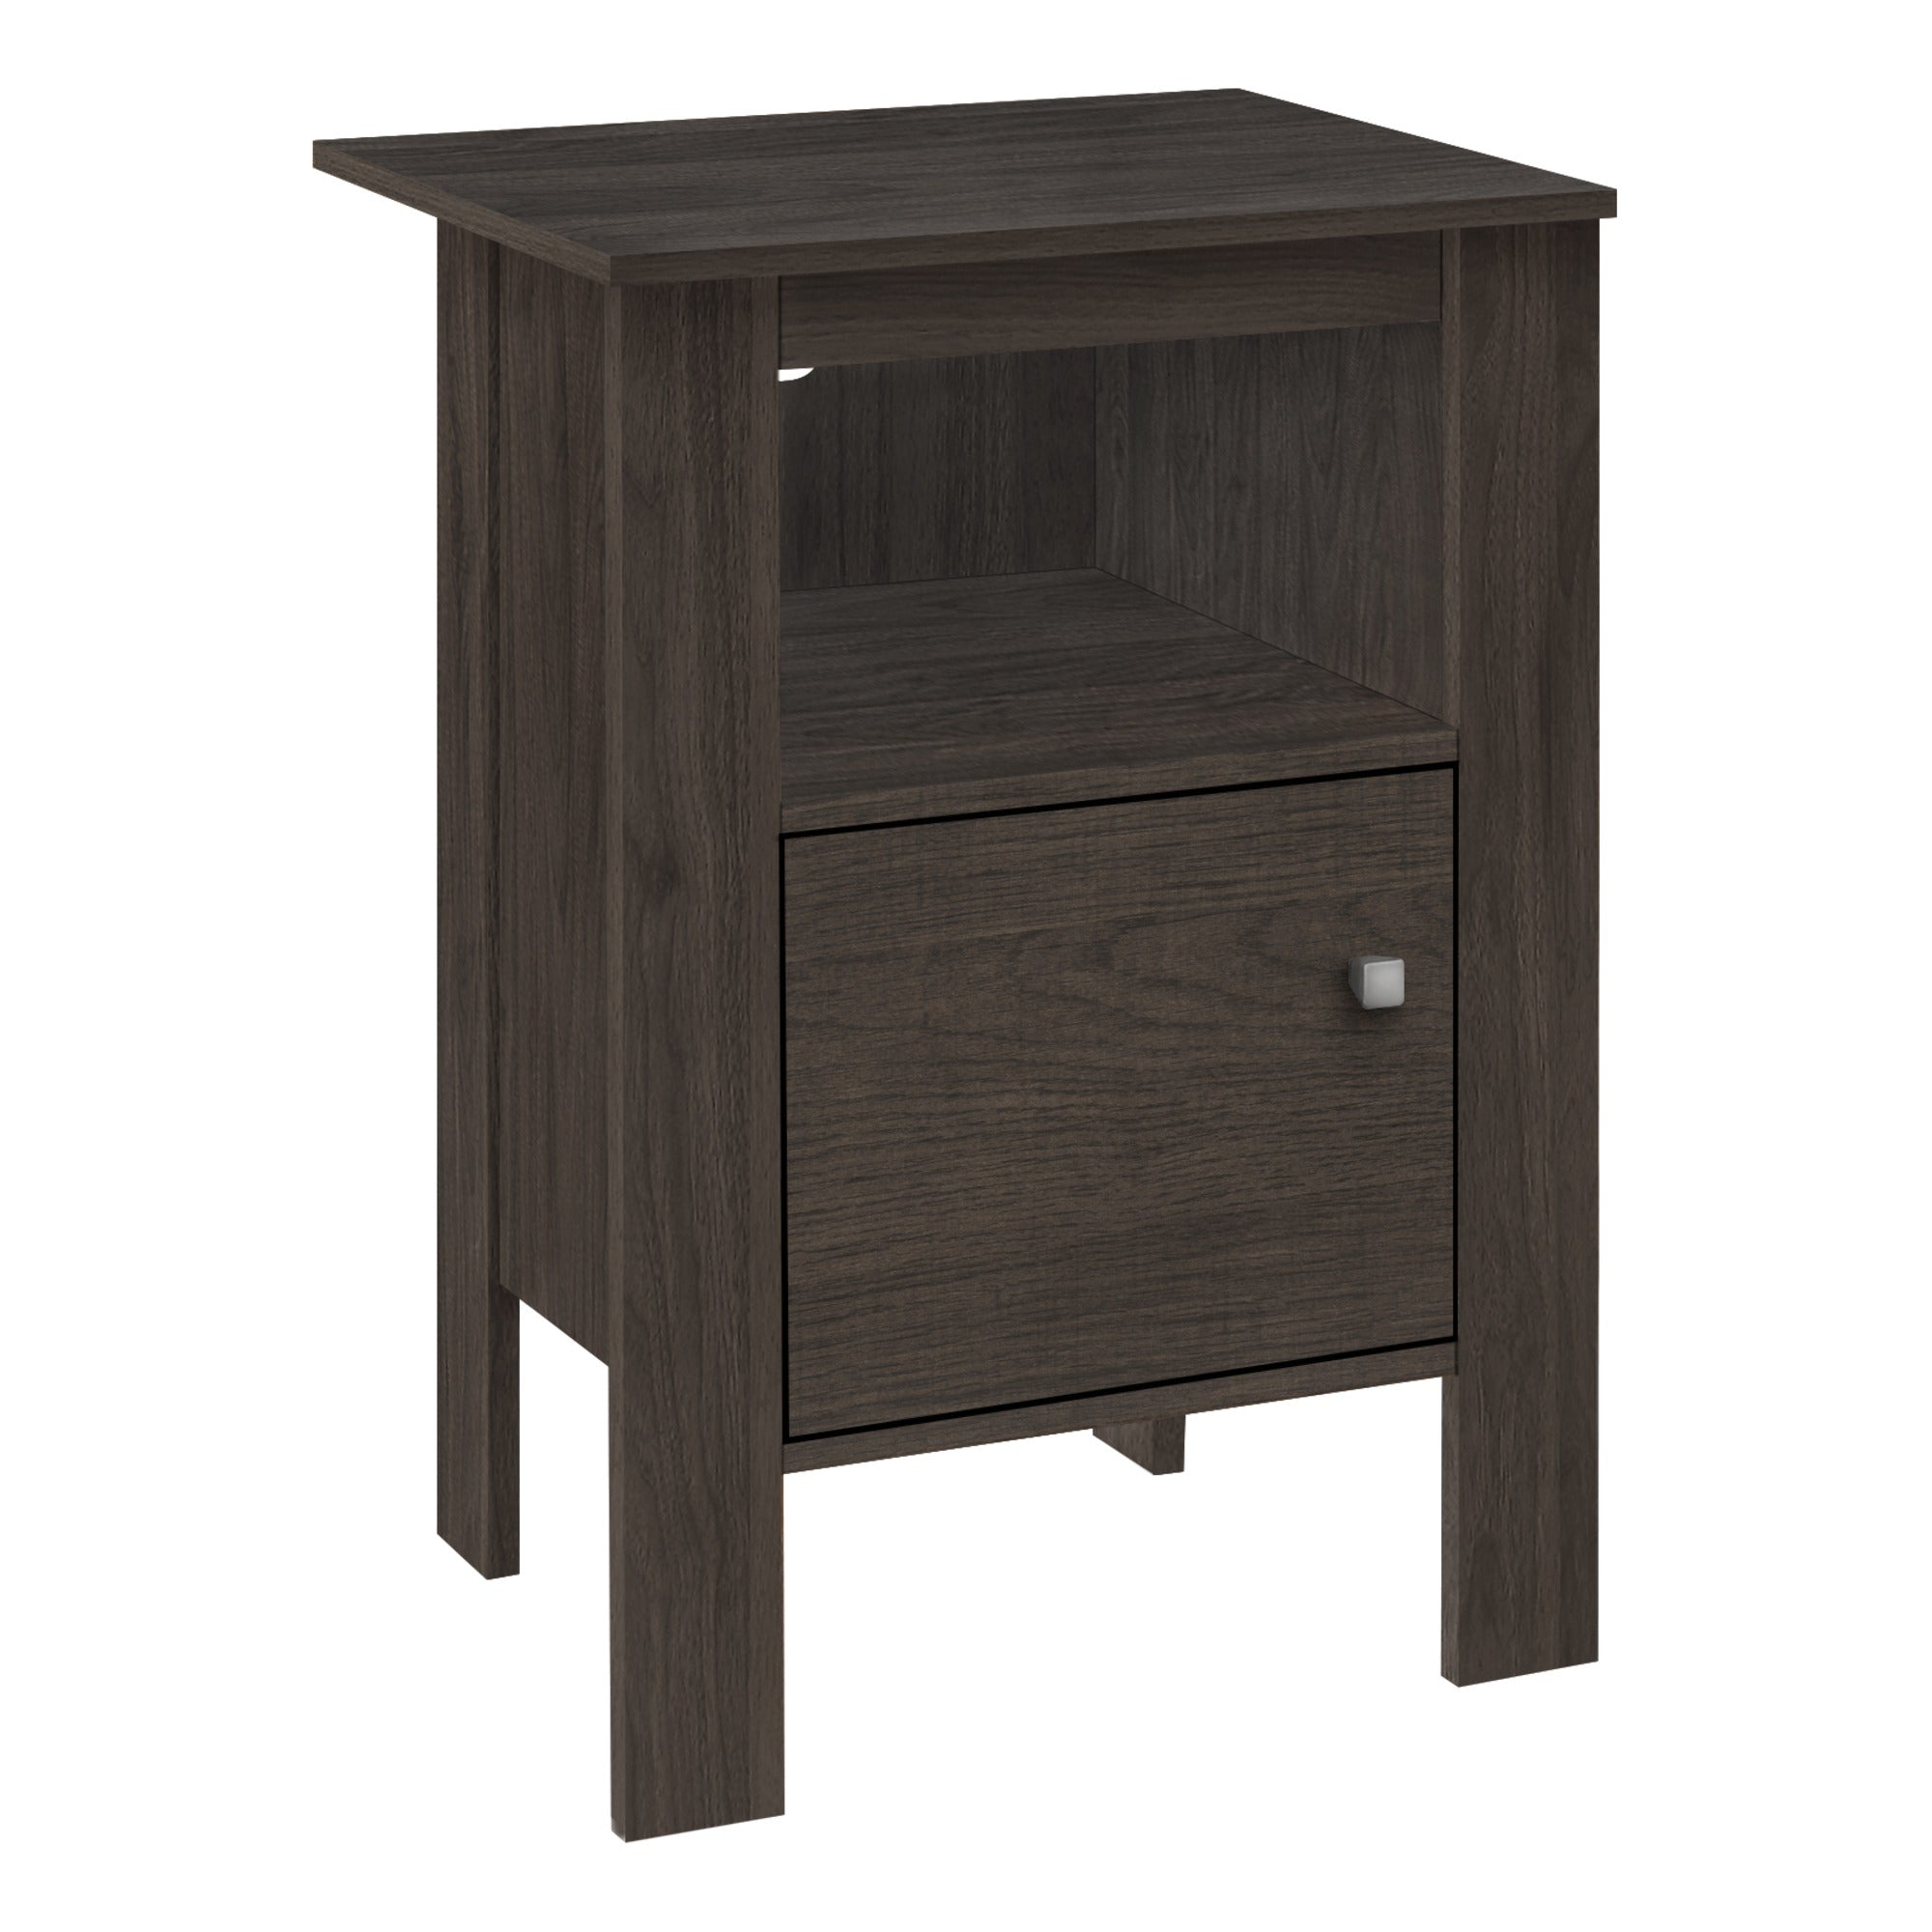 ACCENT TABLE - BLACK / GREY TOP NIGHT STAND WITH STORAGE